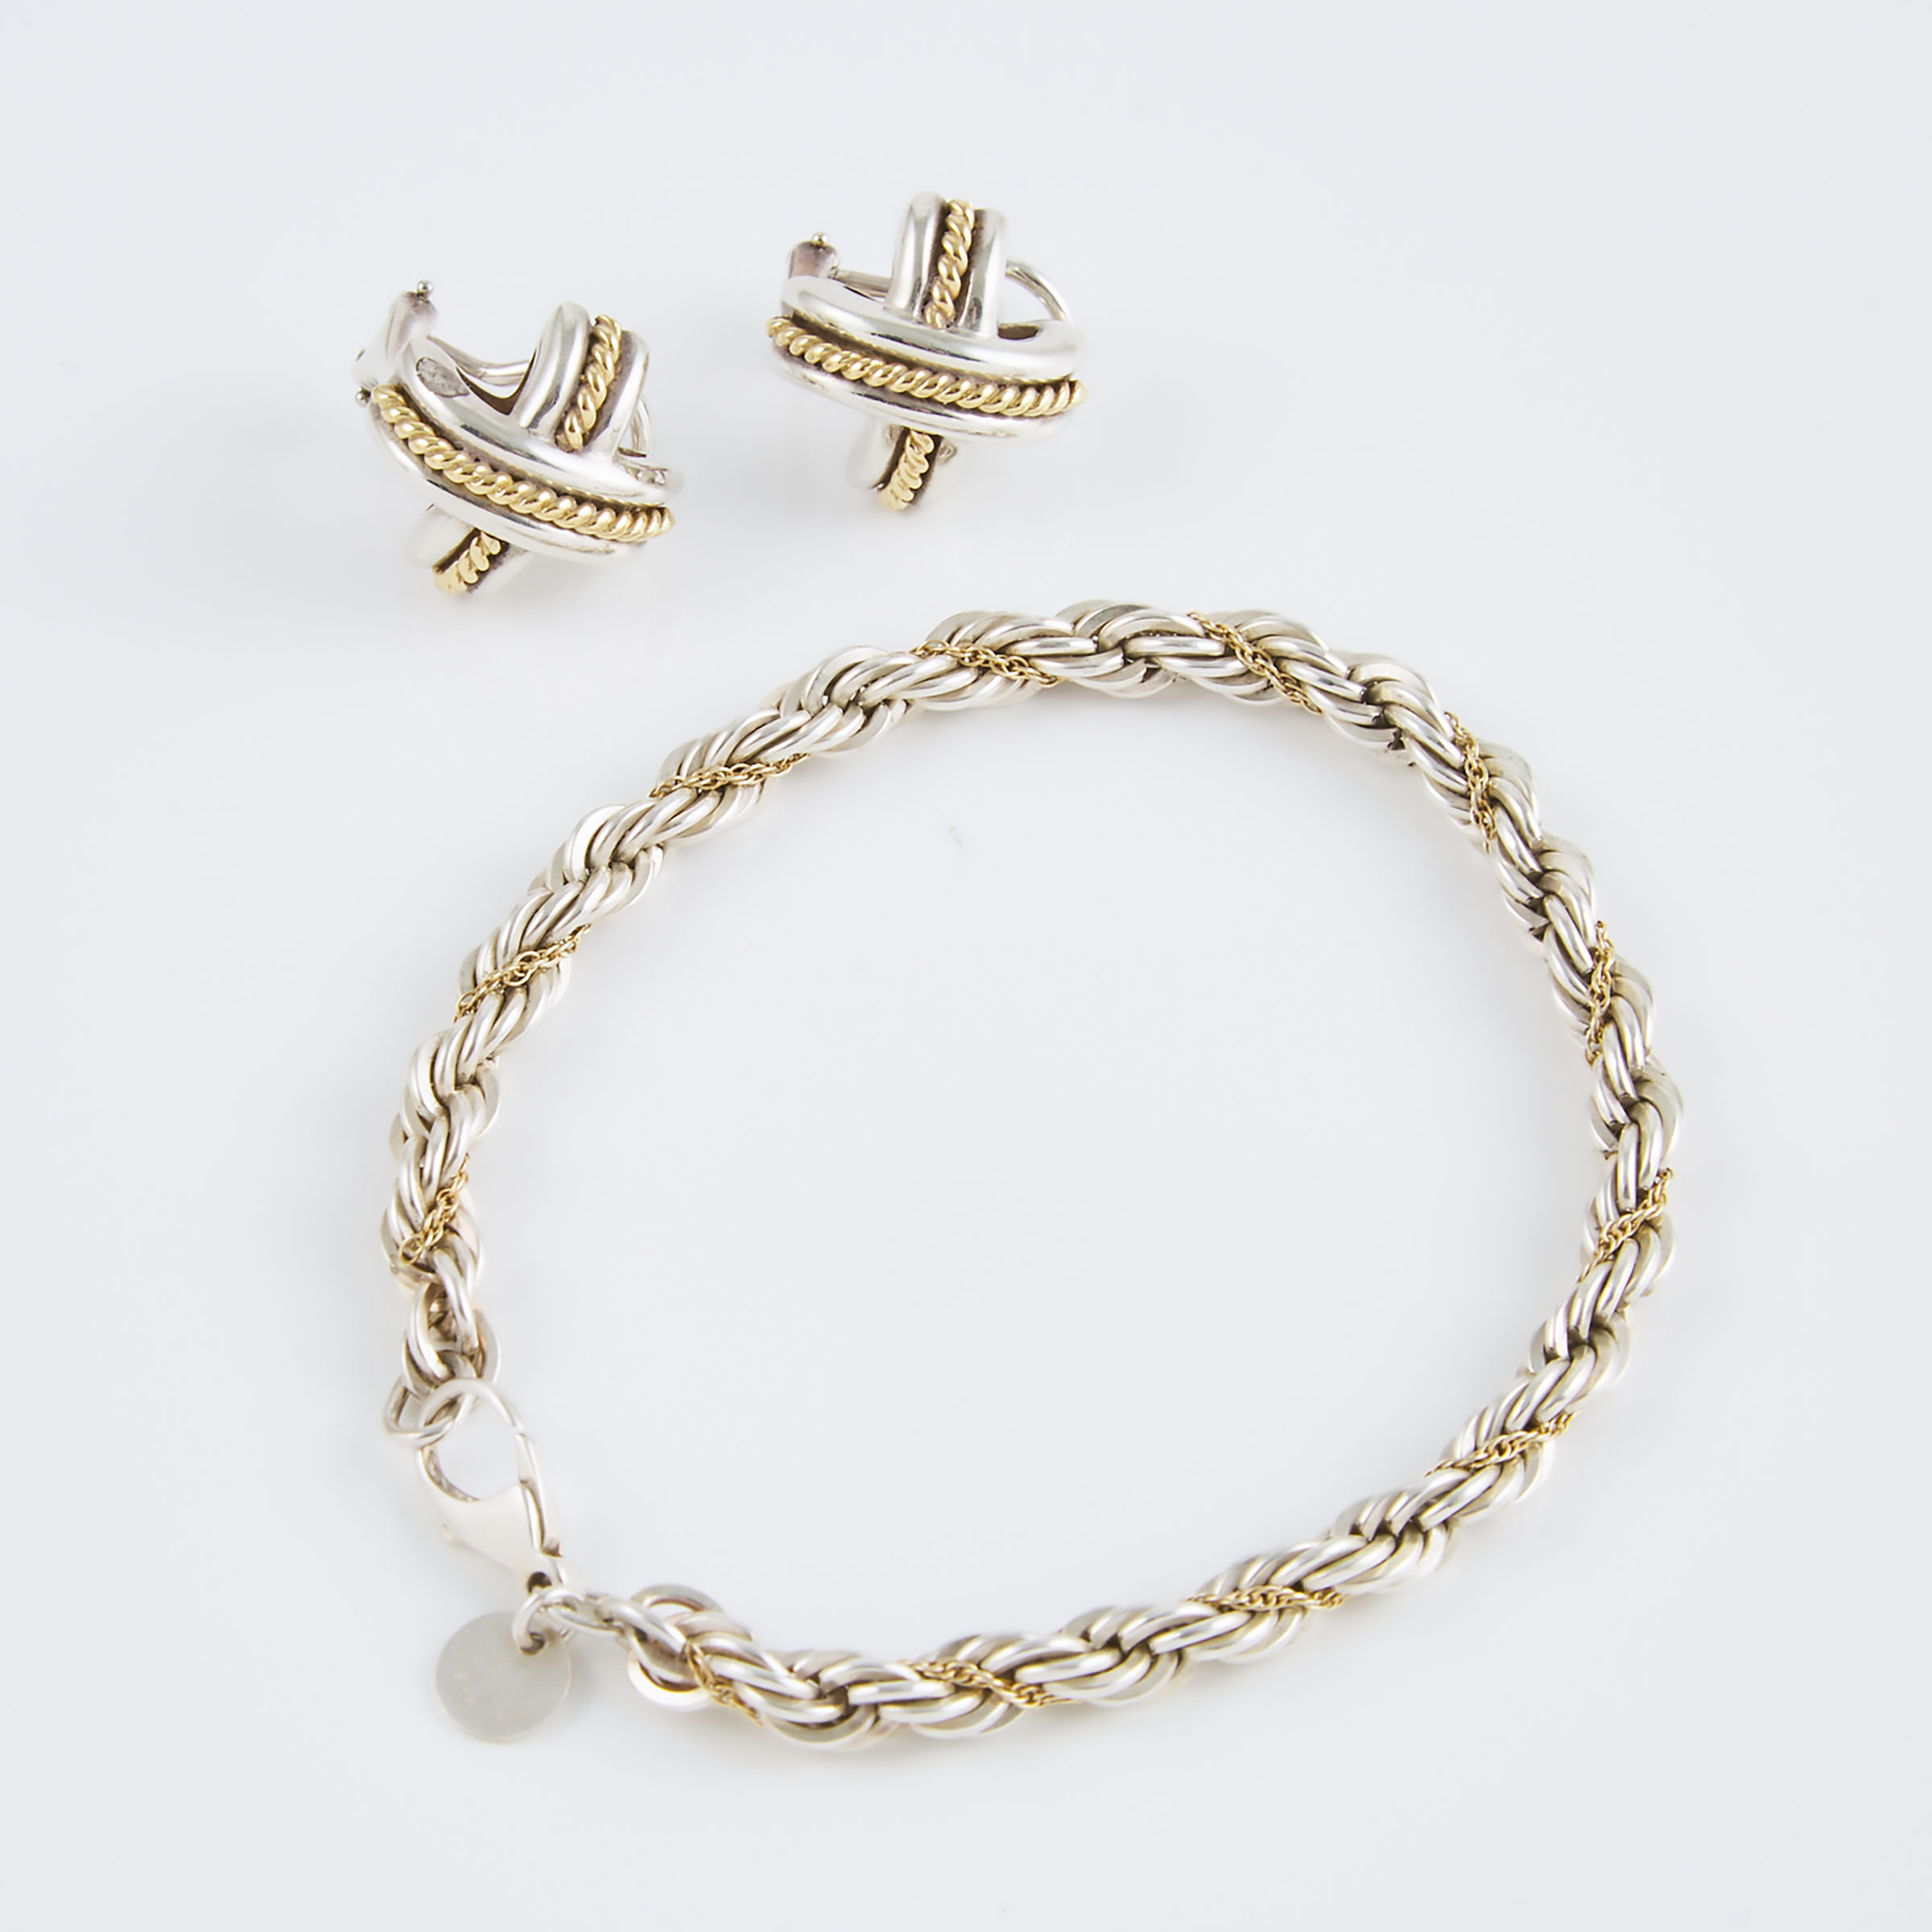 Tiffany & Co. Sterling Silver And 18k Yellow Gold Earrings And Rope Bracelet